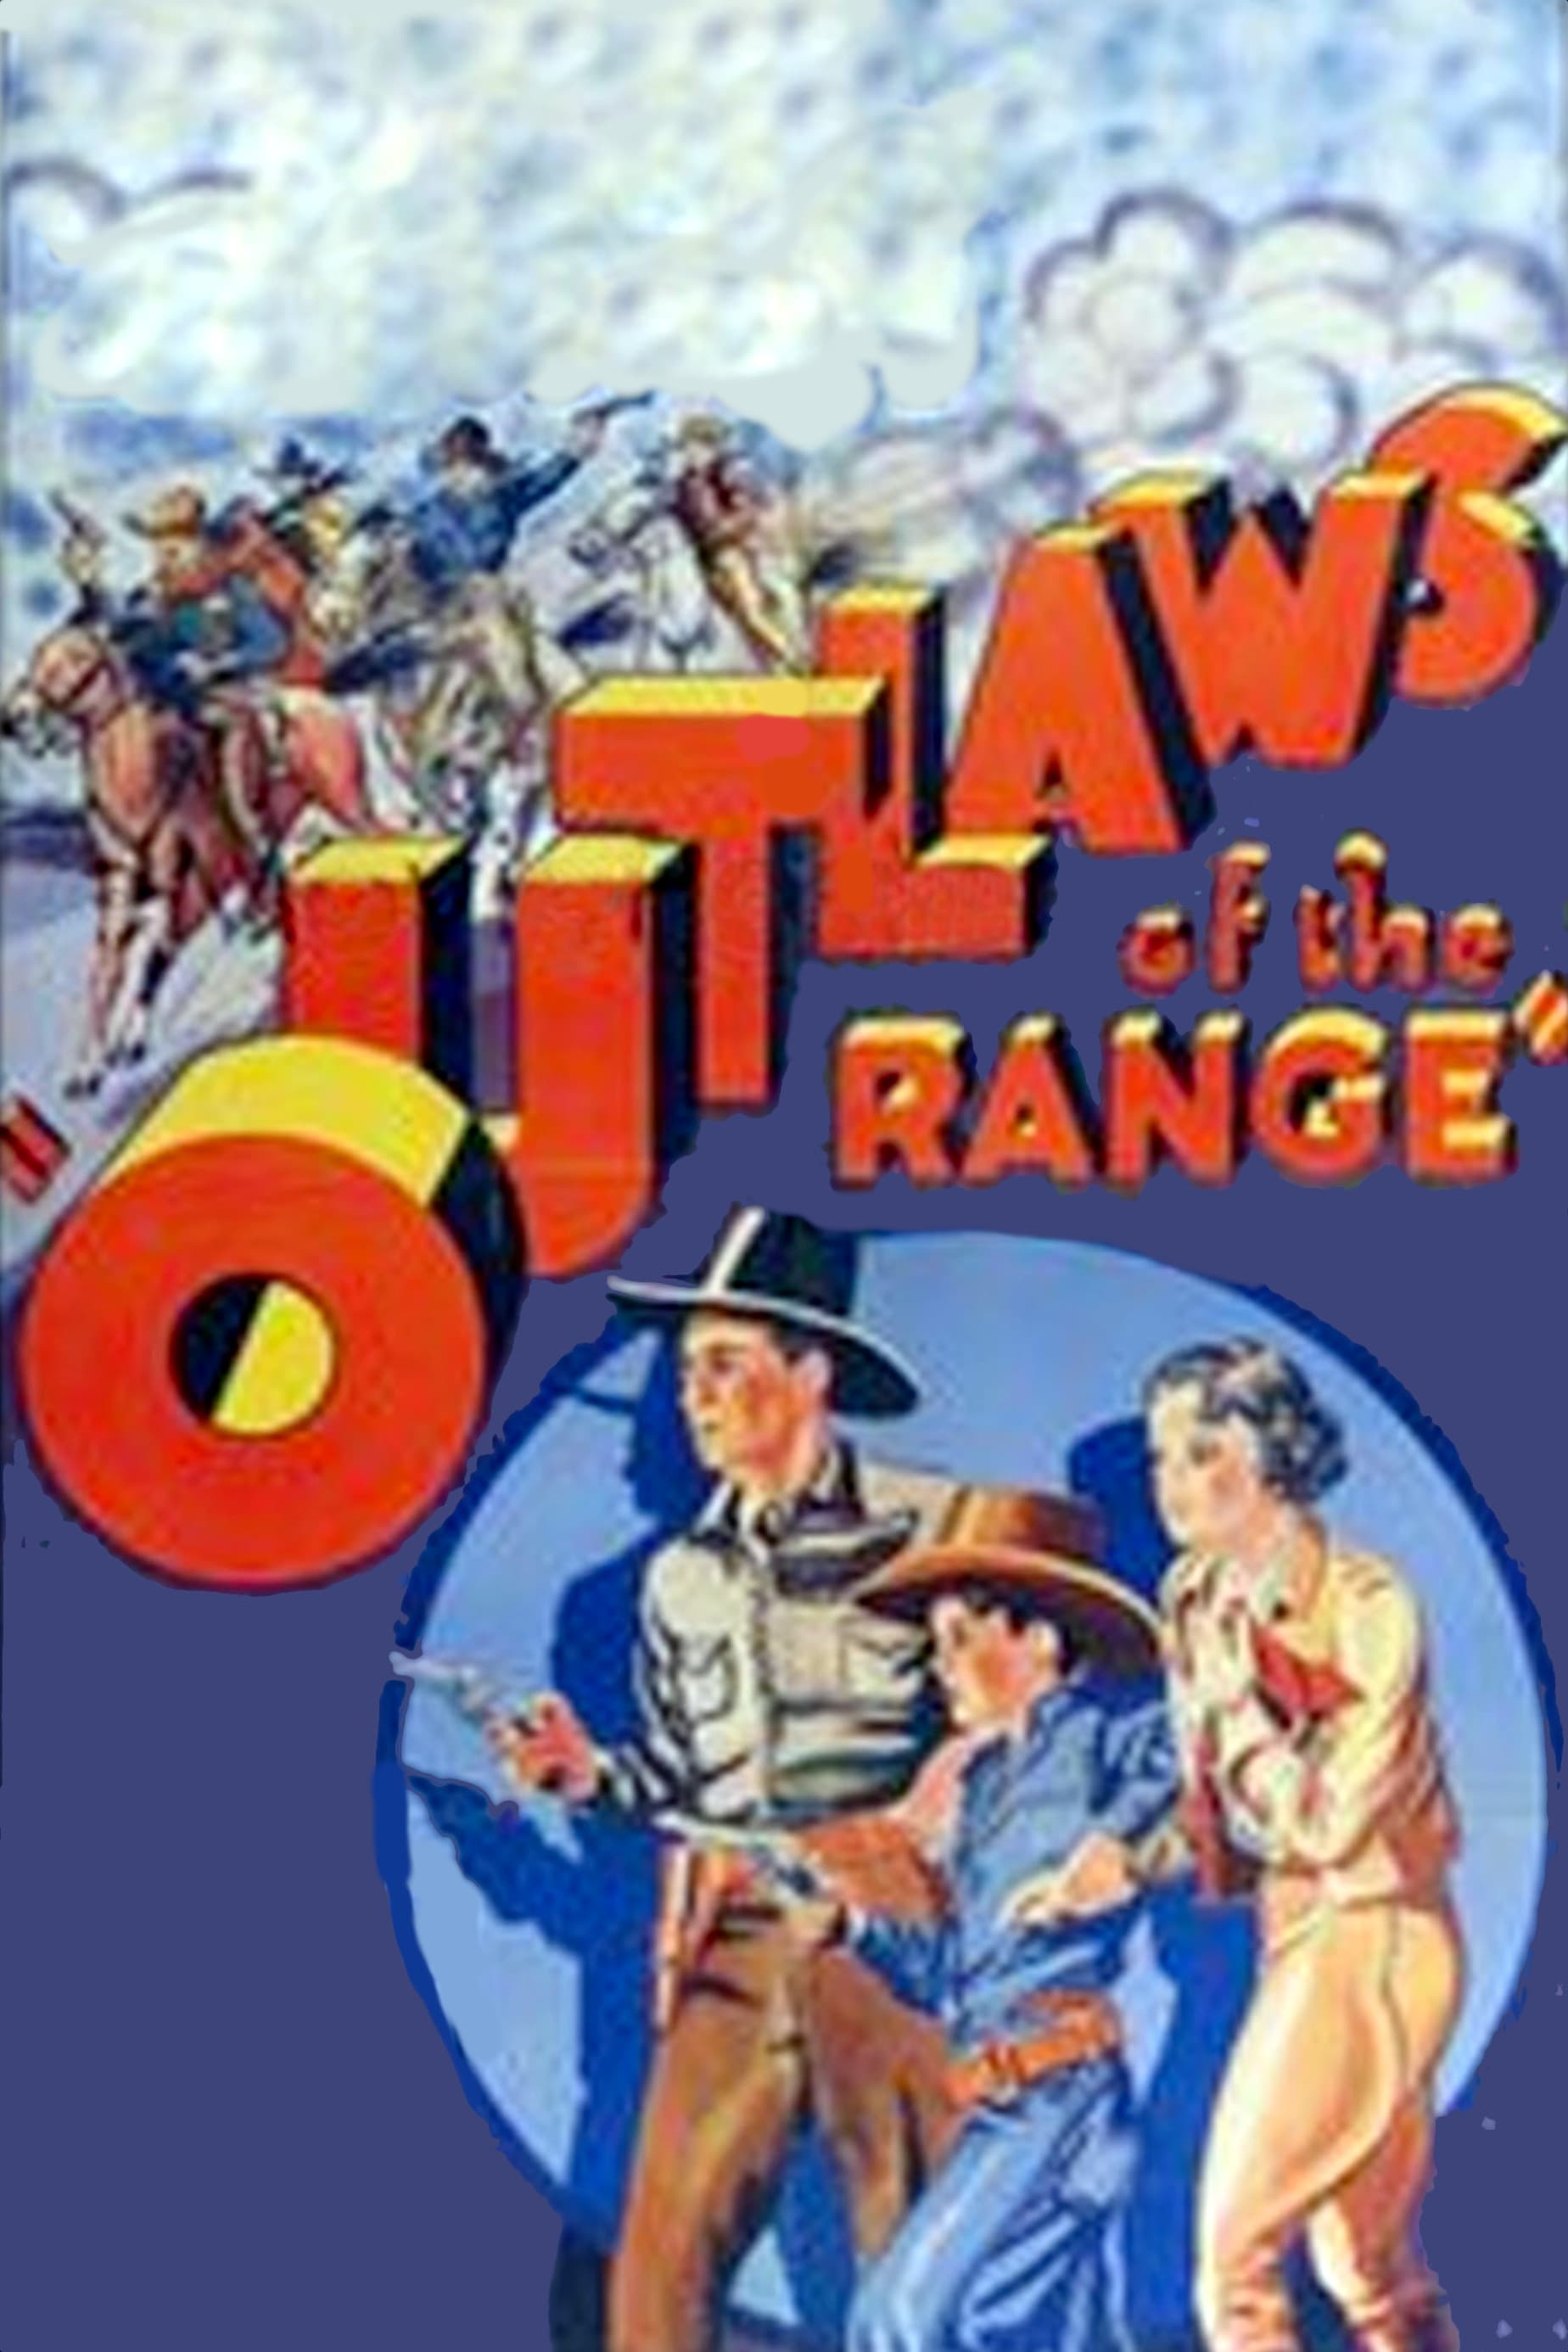 Outlaws of the Range